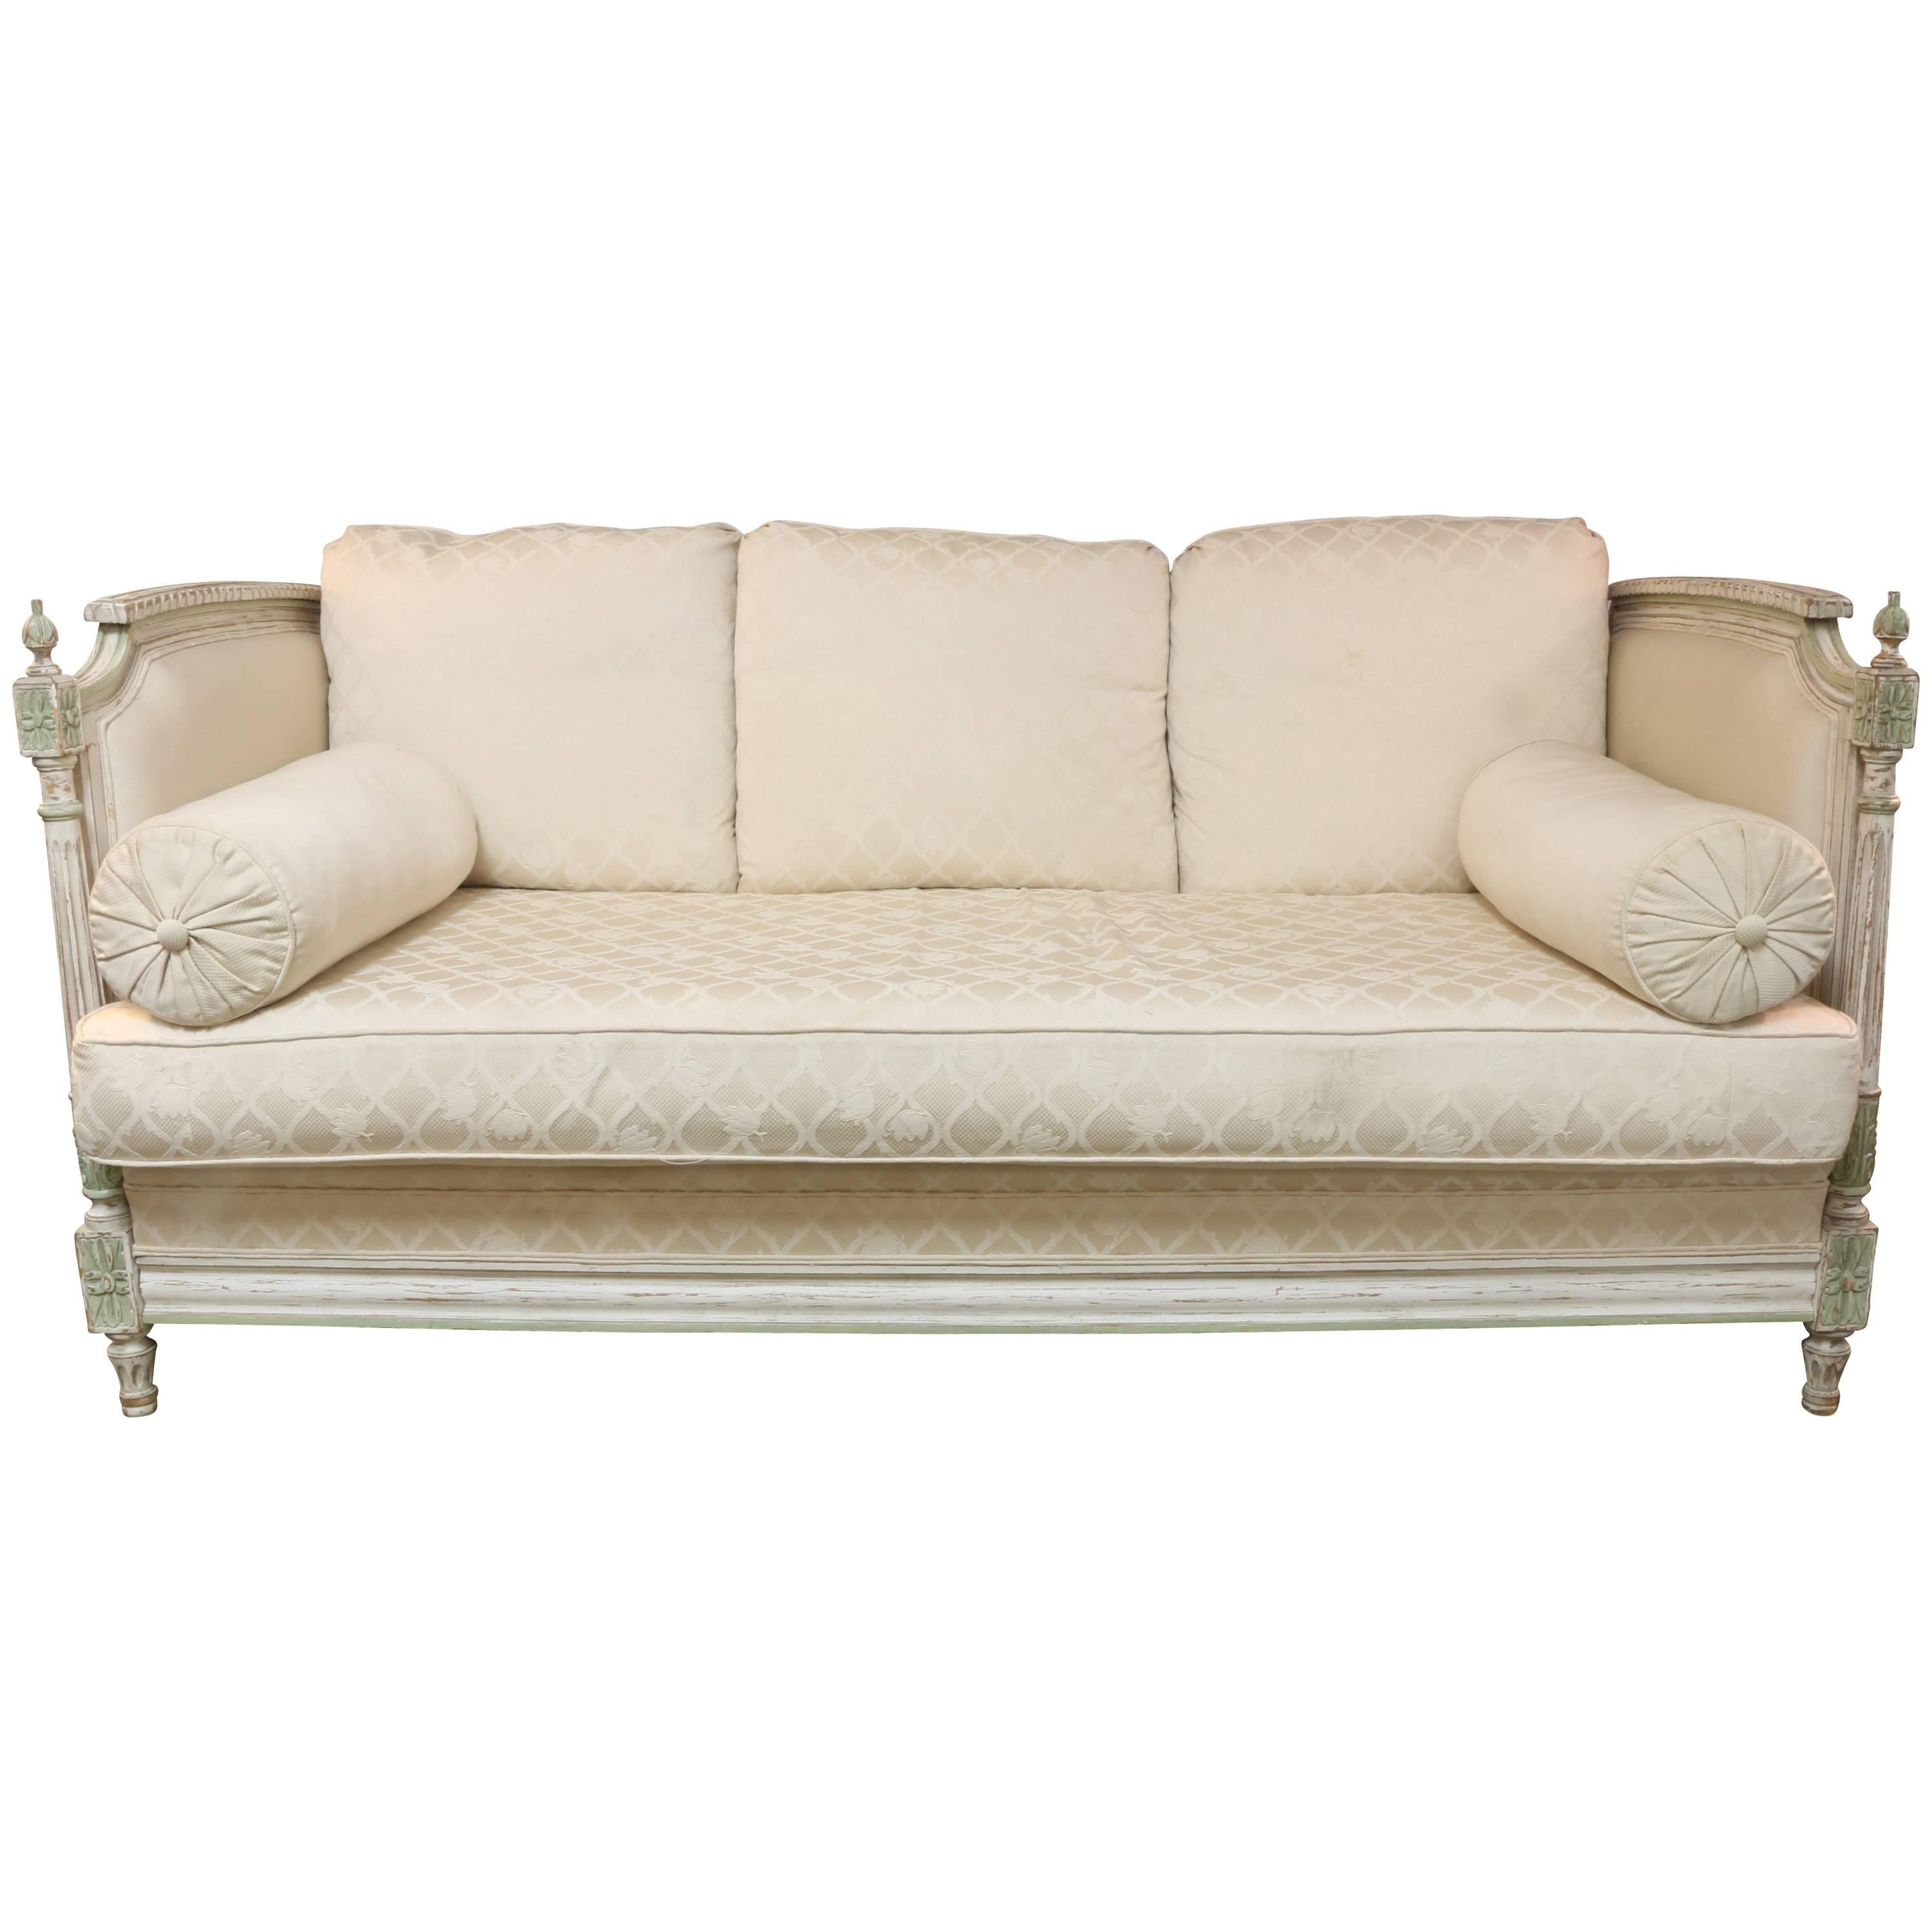 Antique Louis XVI Style Daybed or Settee